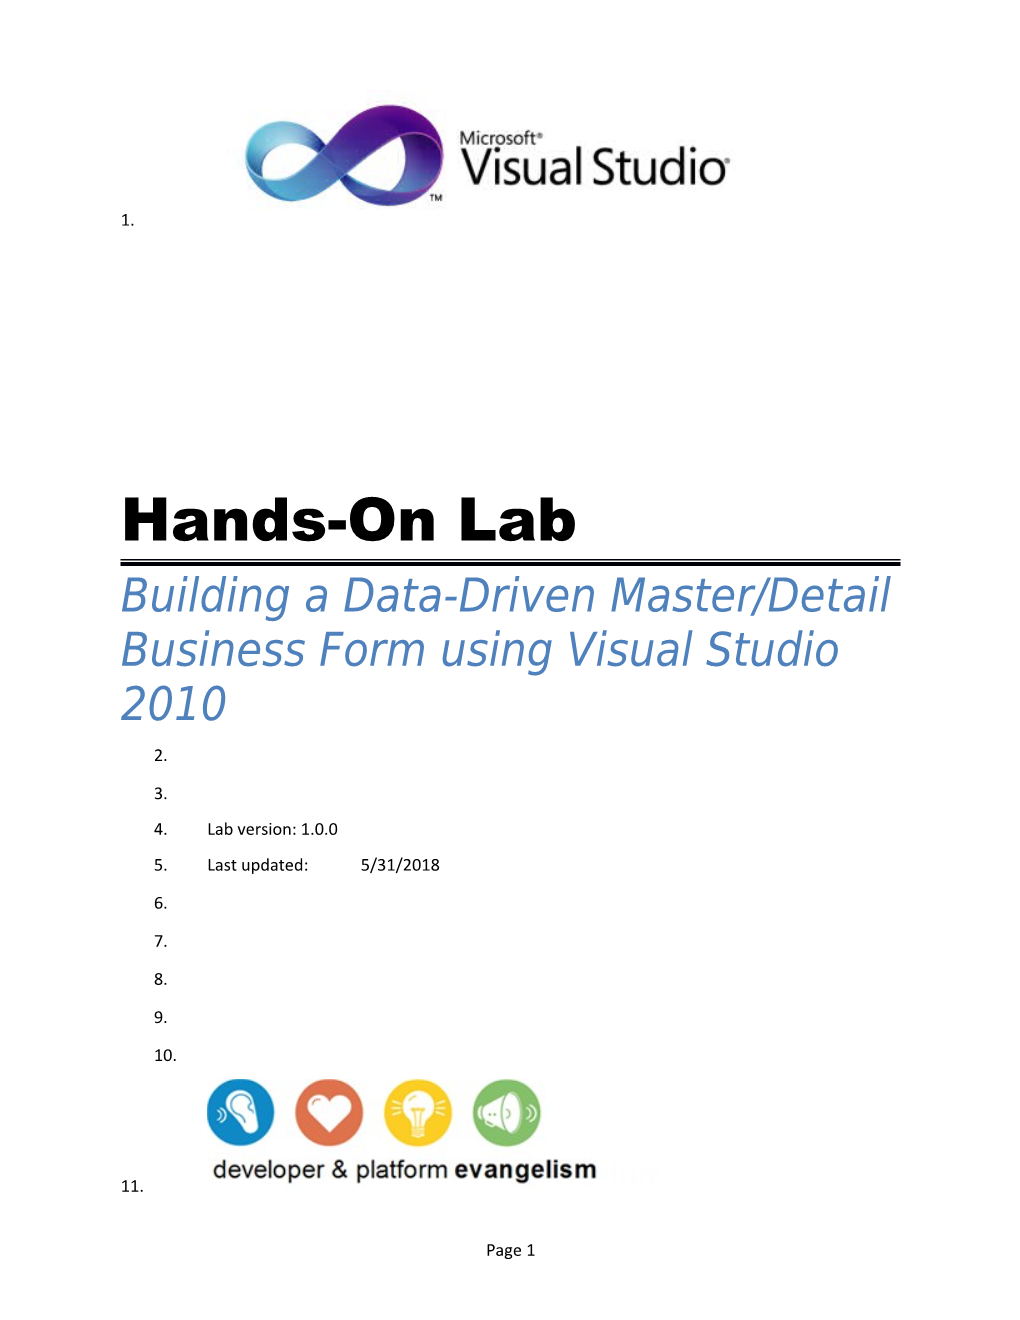 Building a Data-Driven Master/Detail Business Form in WPF Using Visual Studio 2010